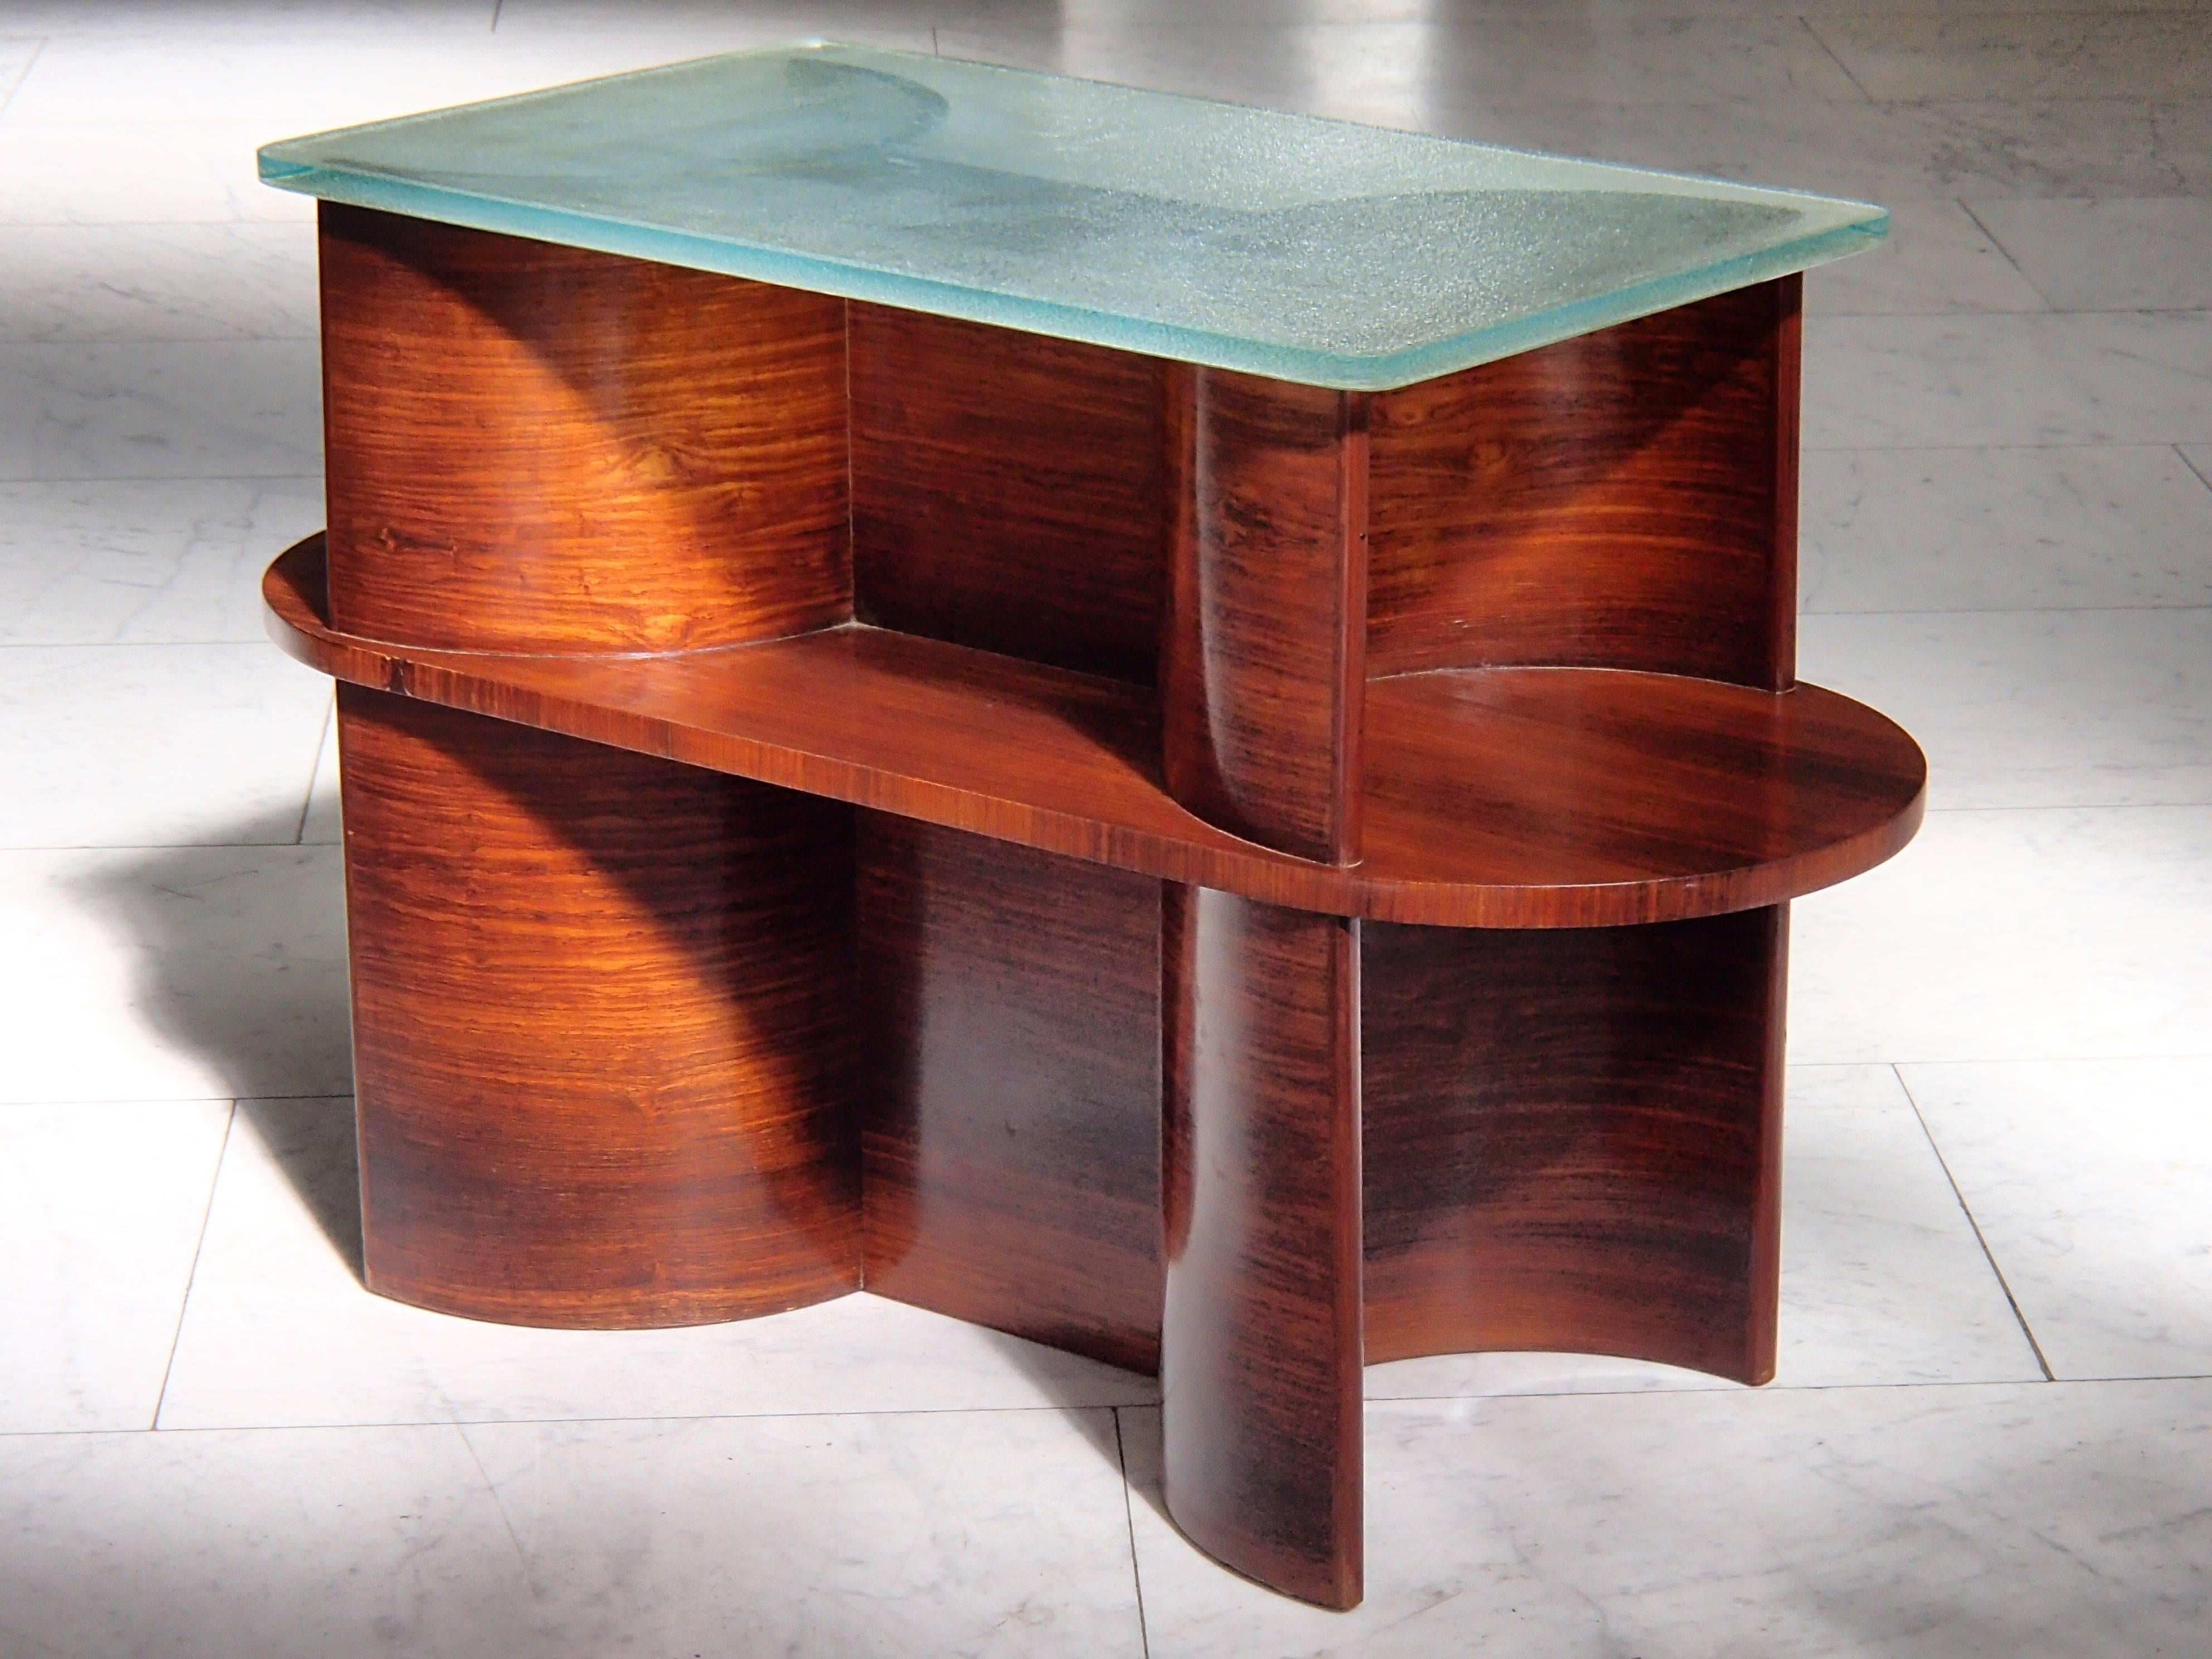 1930 Cubist Modernistic Console Table Rosewood and Thick Glass Top For Sale 2